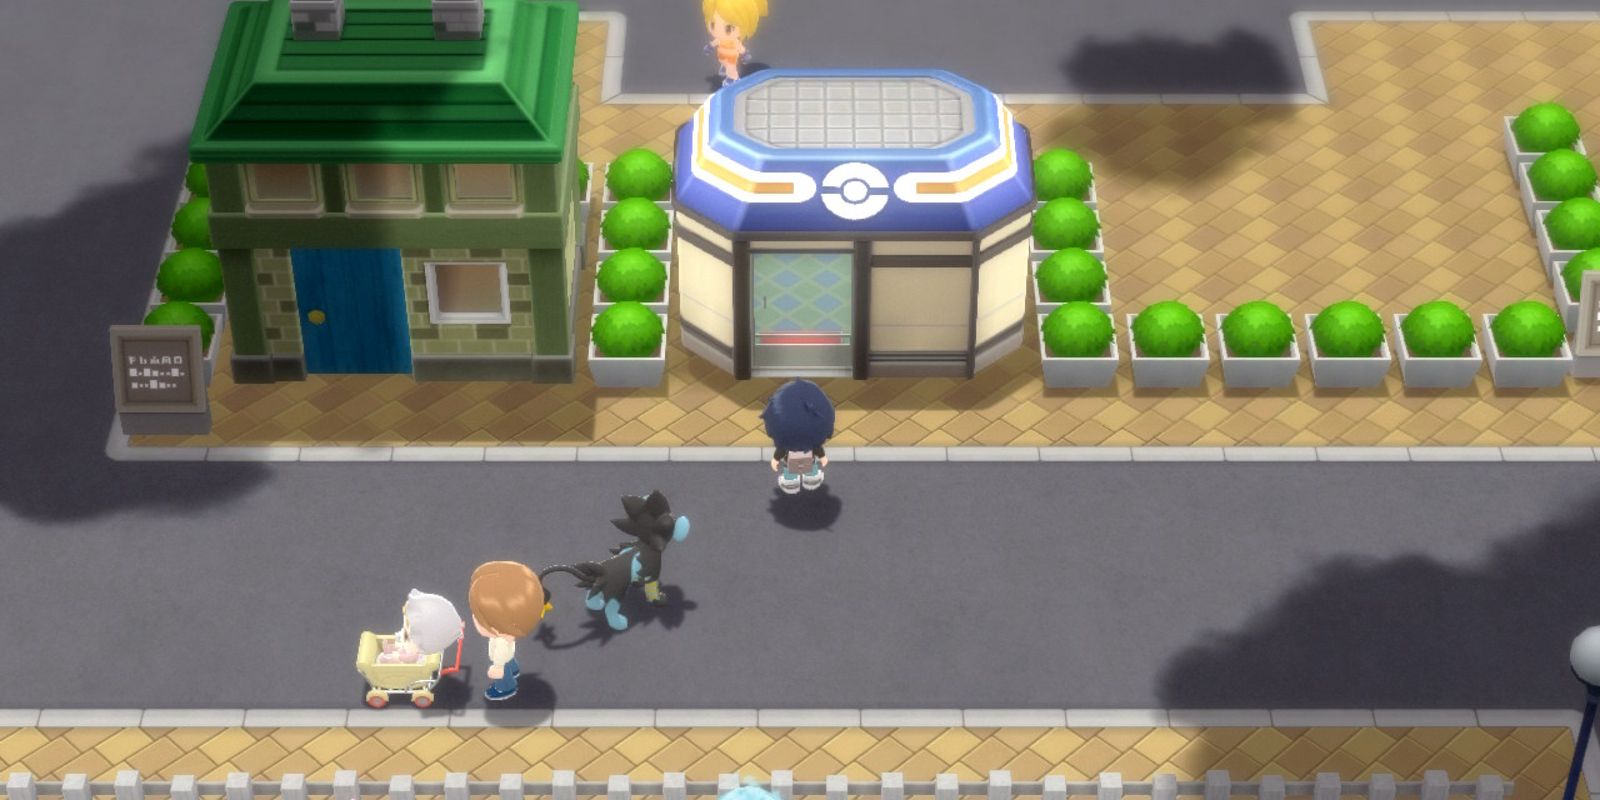 Players can sell Valuable Items at the PokeMart to earn money quickly.